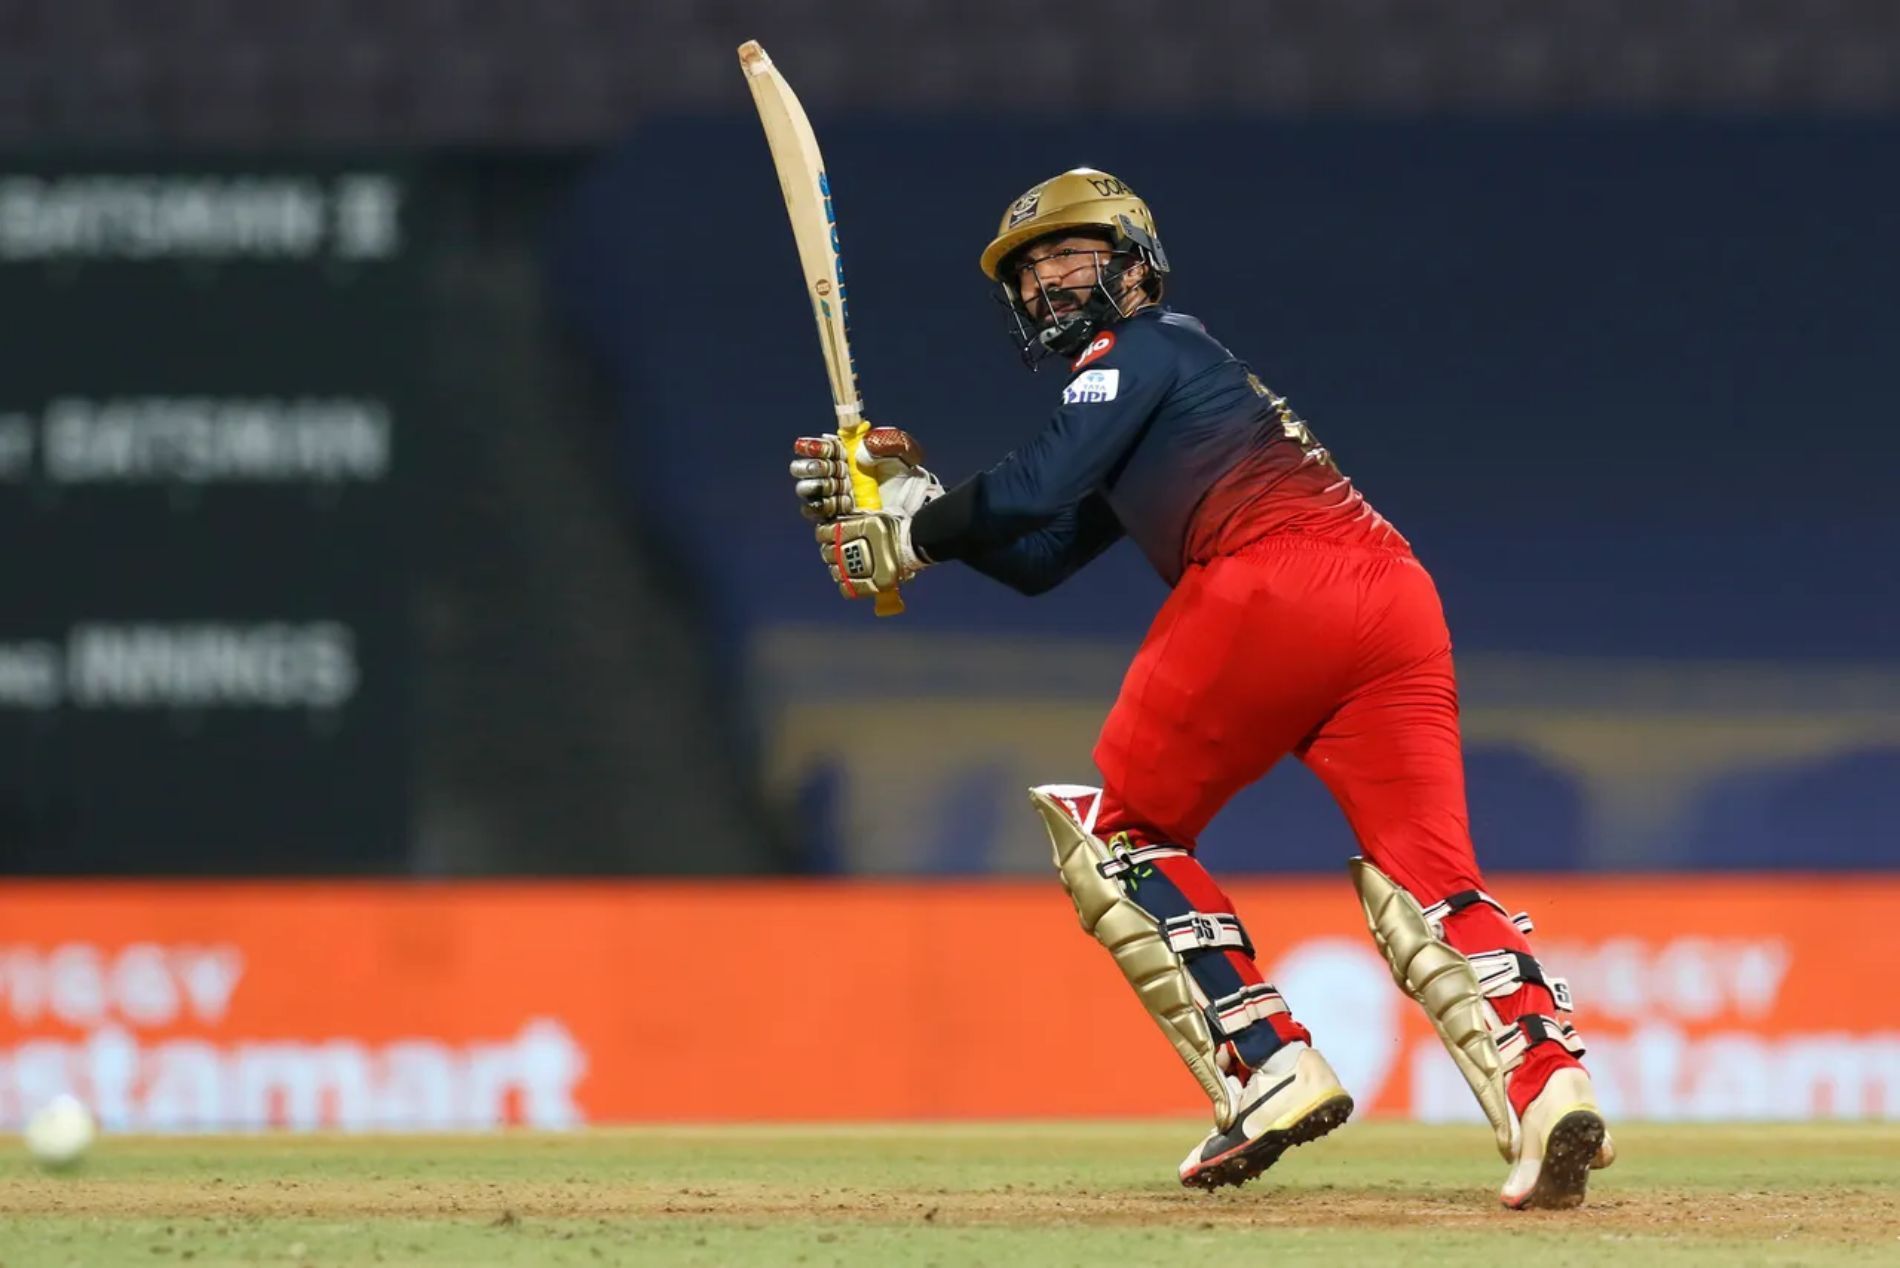 Dinesh Karthik has been fabulous with the bat at the death for RCB. Pic: IPLT20.COM